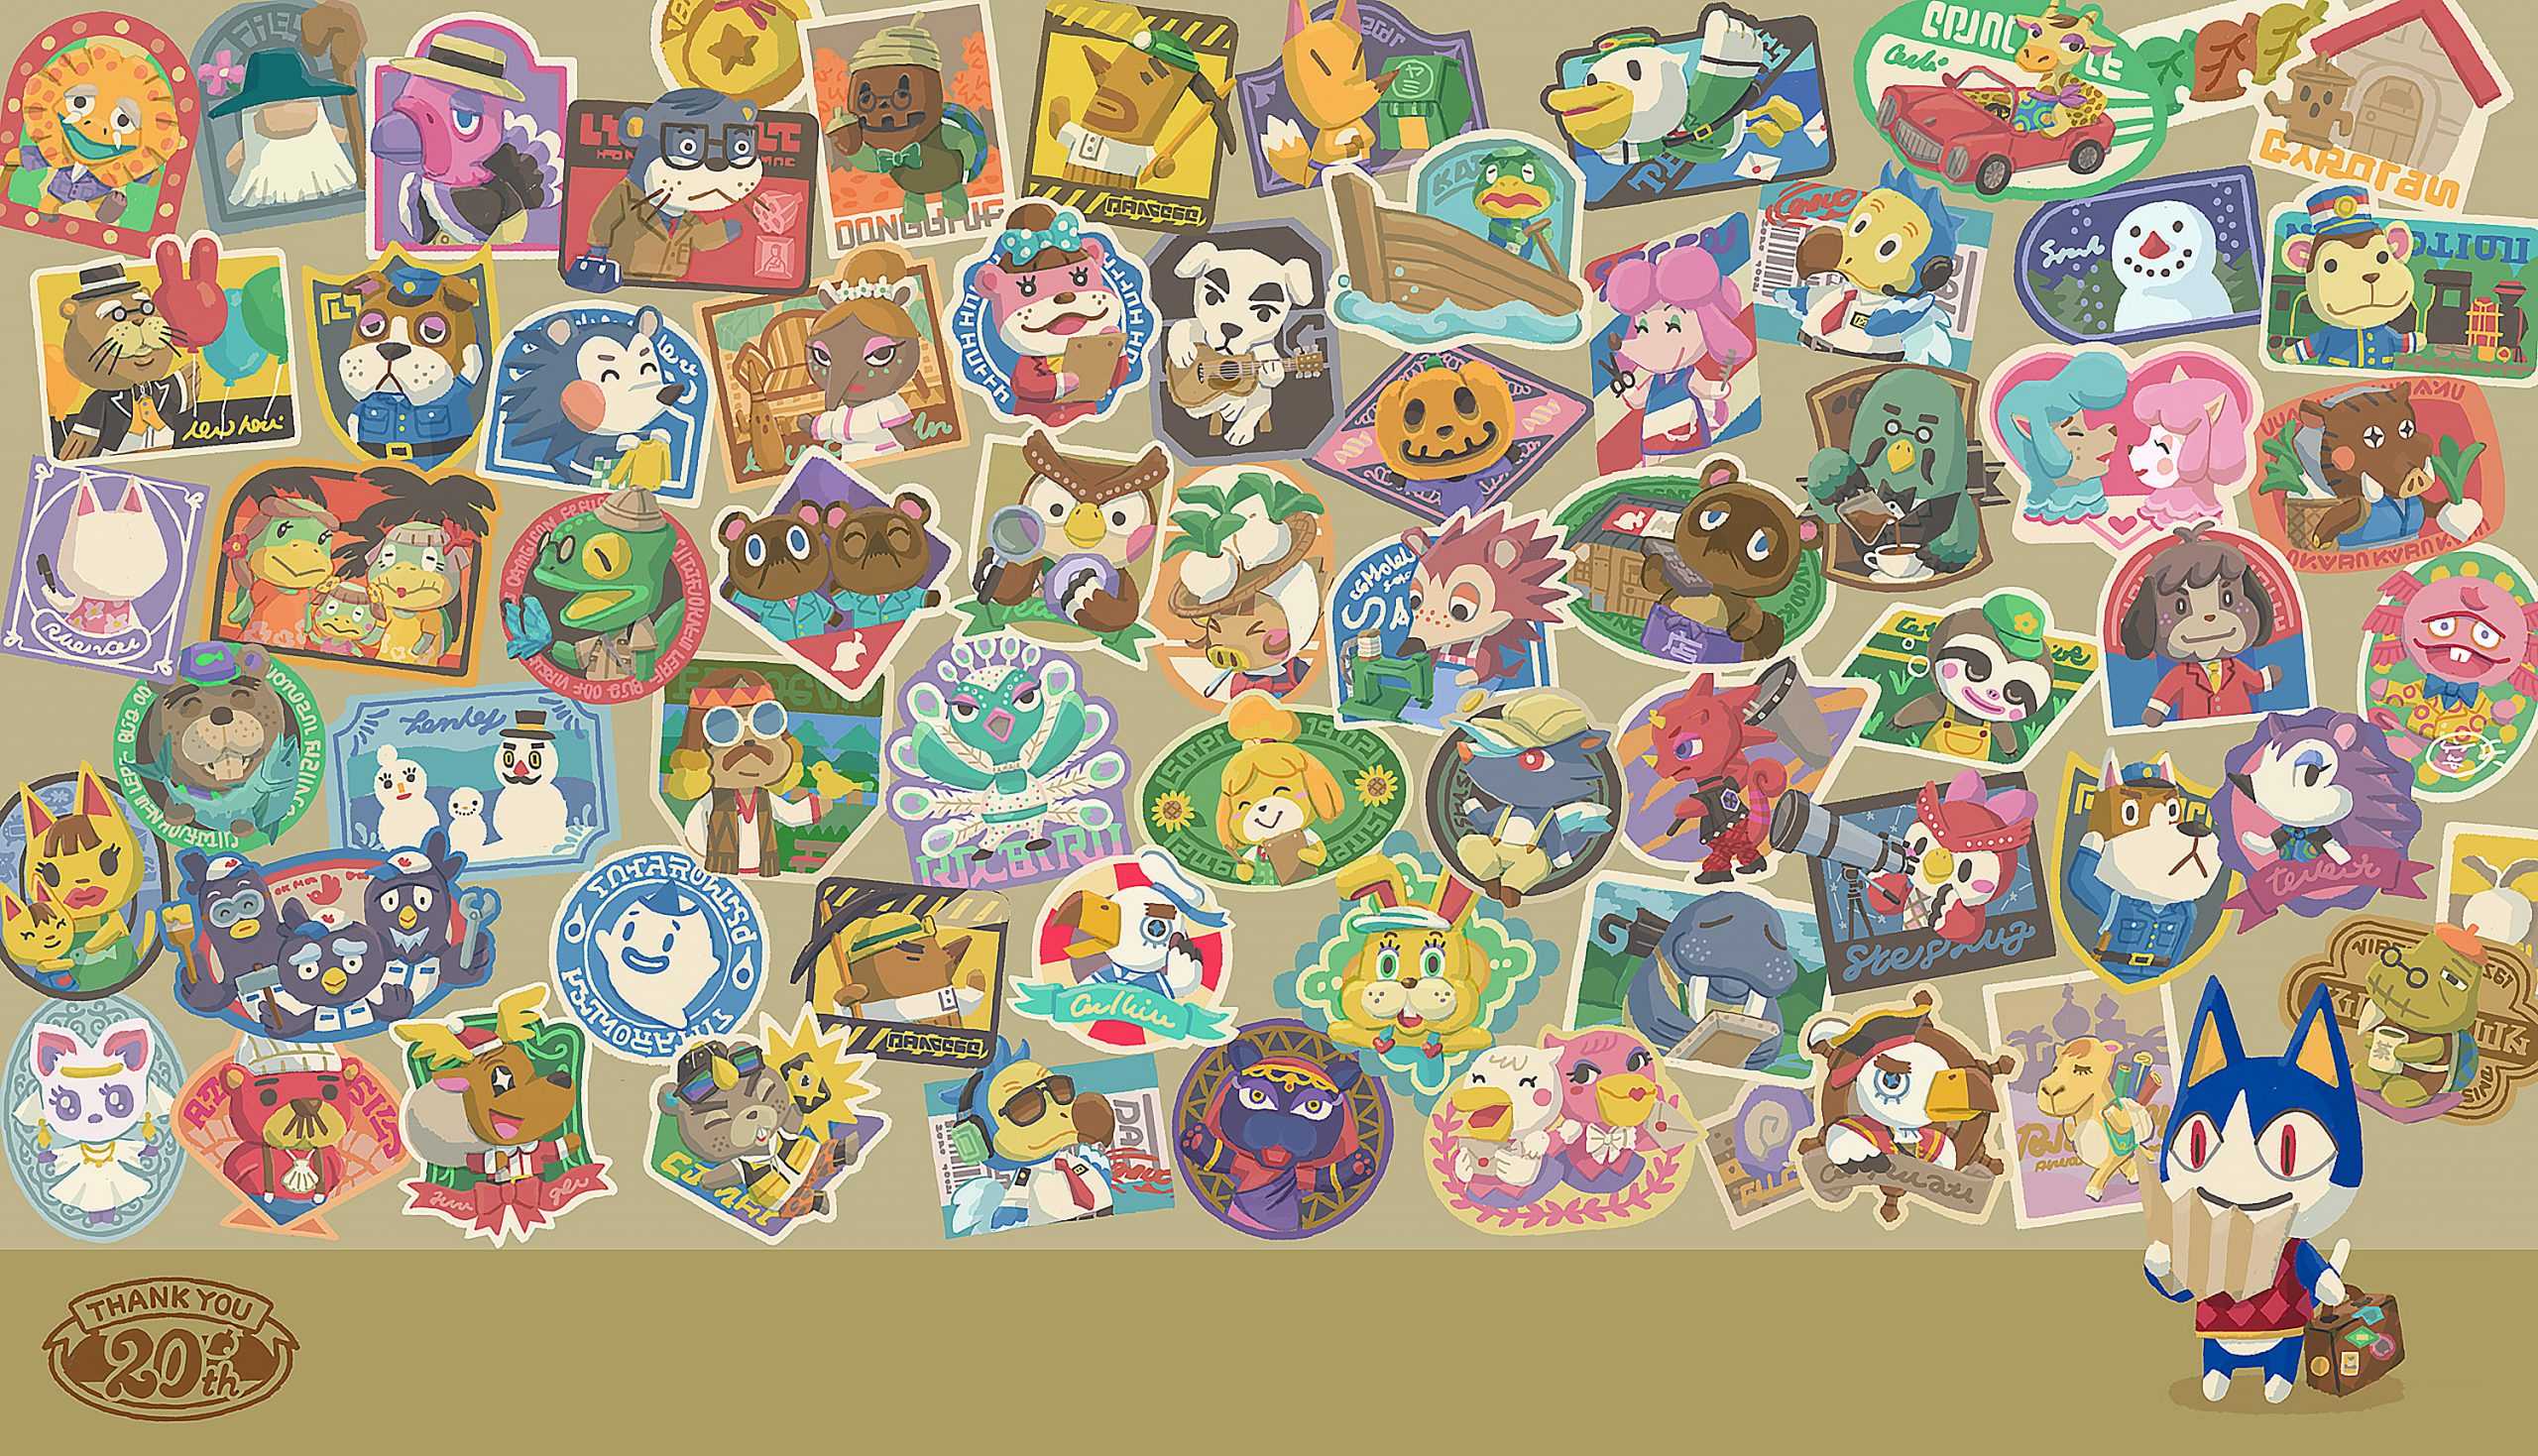 Nintendo Celebrates Years Of Animal Crossing With Art Featuring Past Characters Like Brewster Animal Crossing World